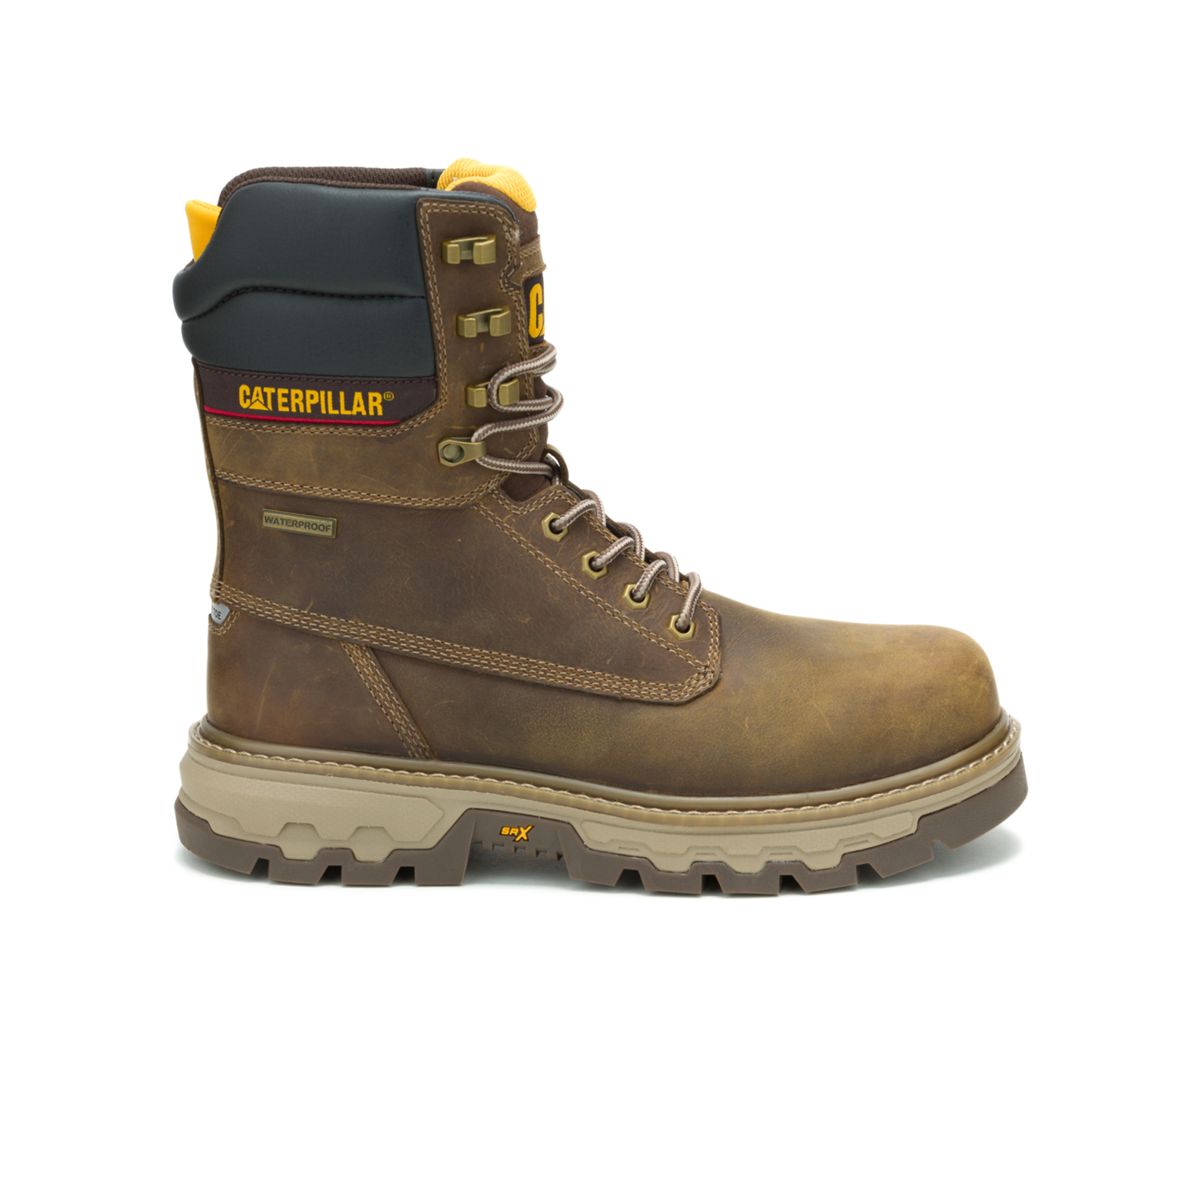 Colorado Equip 8" Waterproof Thinsulate™ Composite Toe Work Boot, Pyramid, dynamic